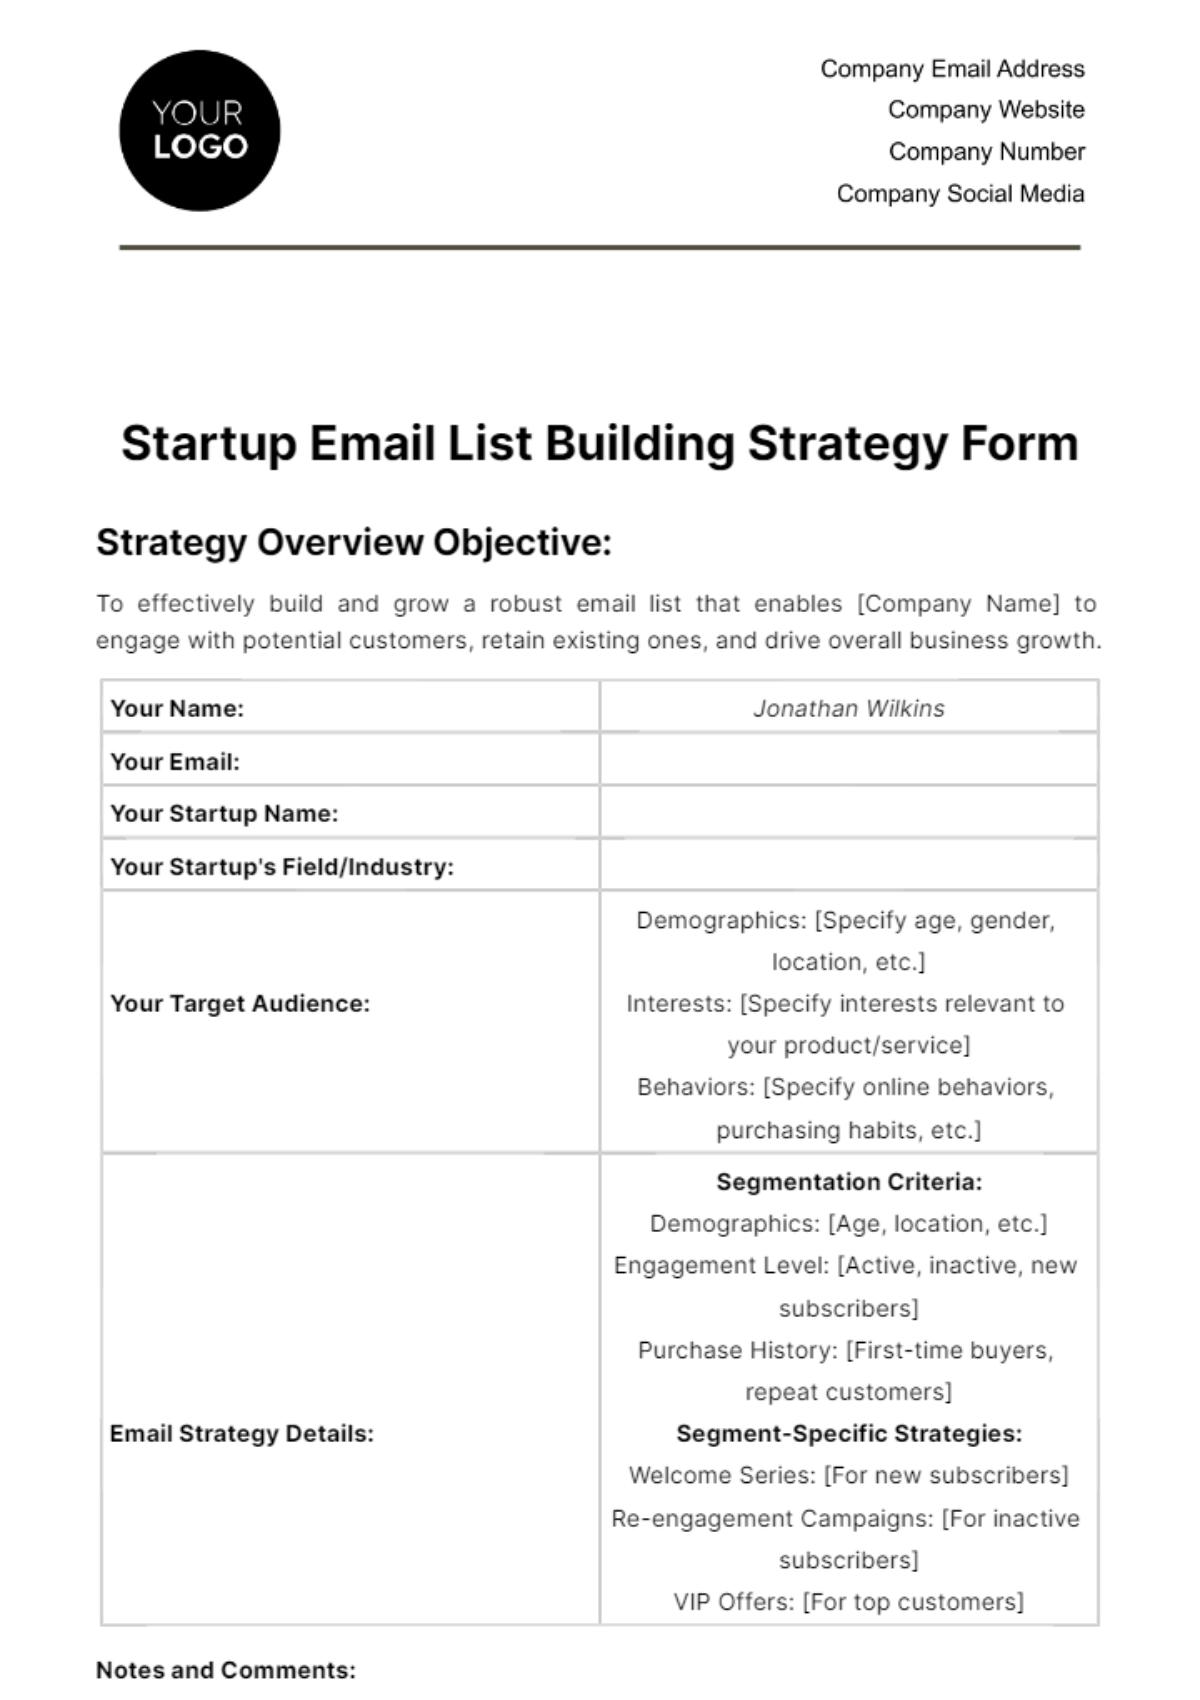 Startup Email List Building Strategy Form Template